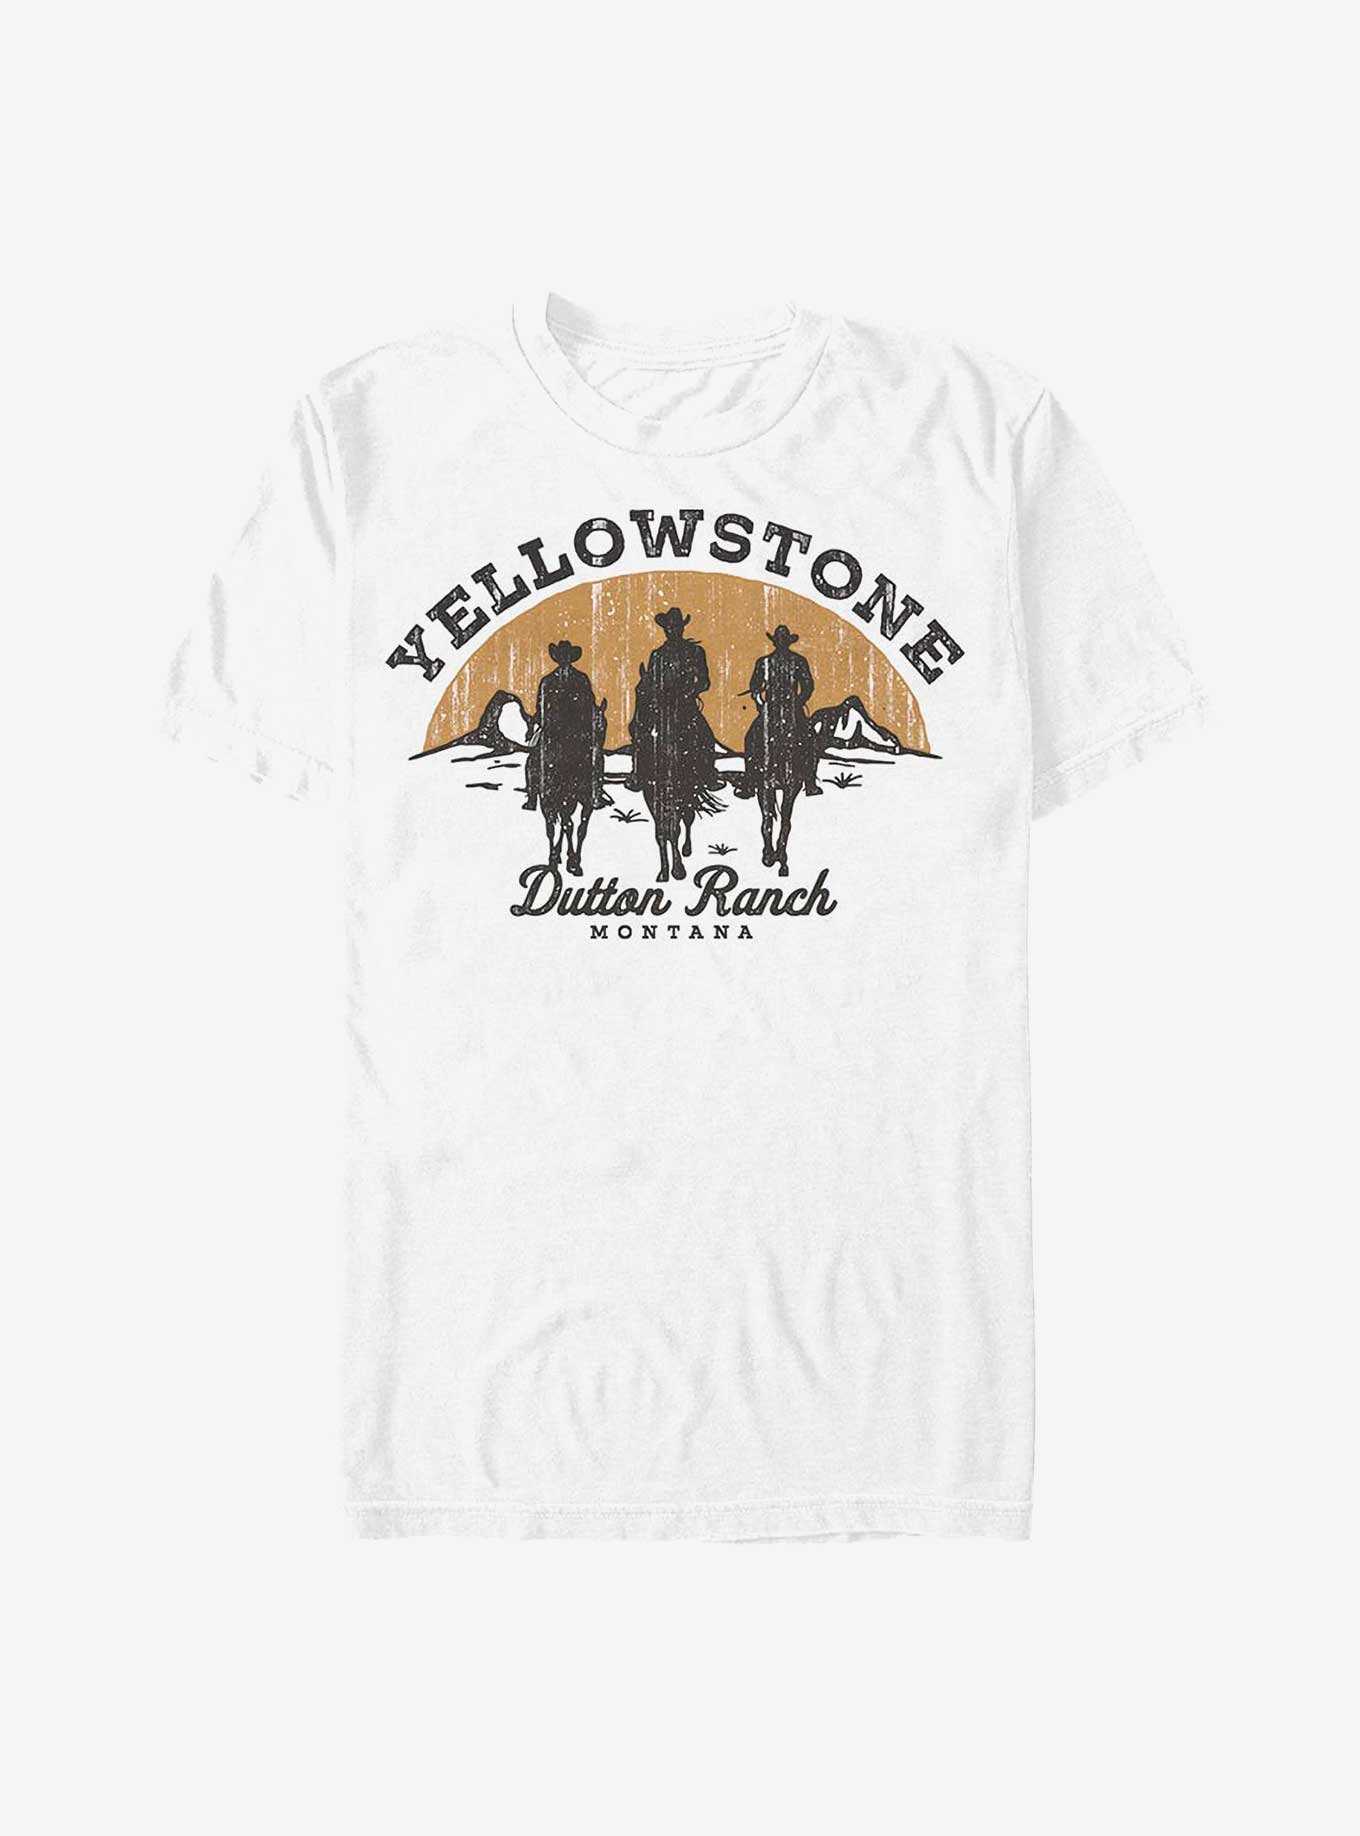 Yellowstone Riding Into The Sunset T-Shirt, , hi-res